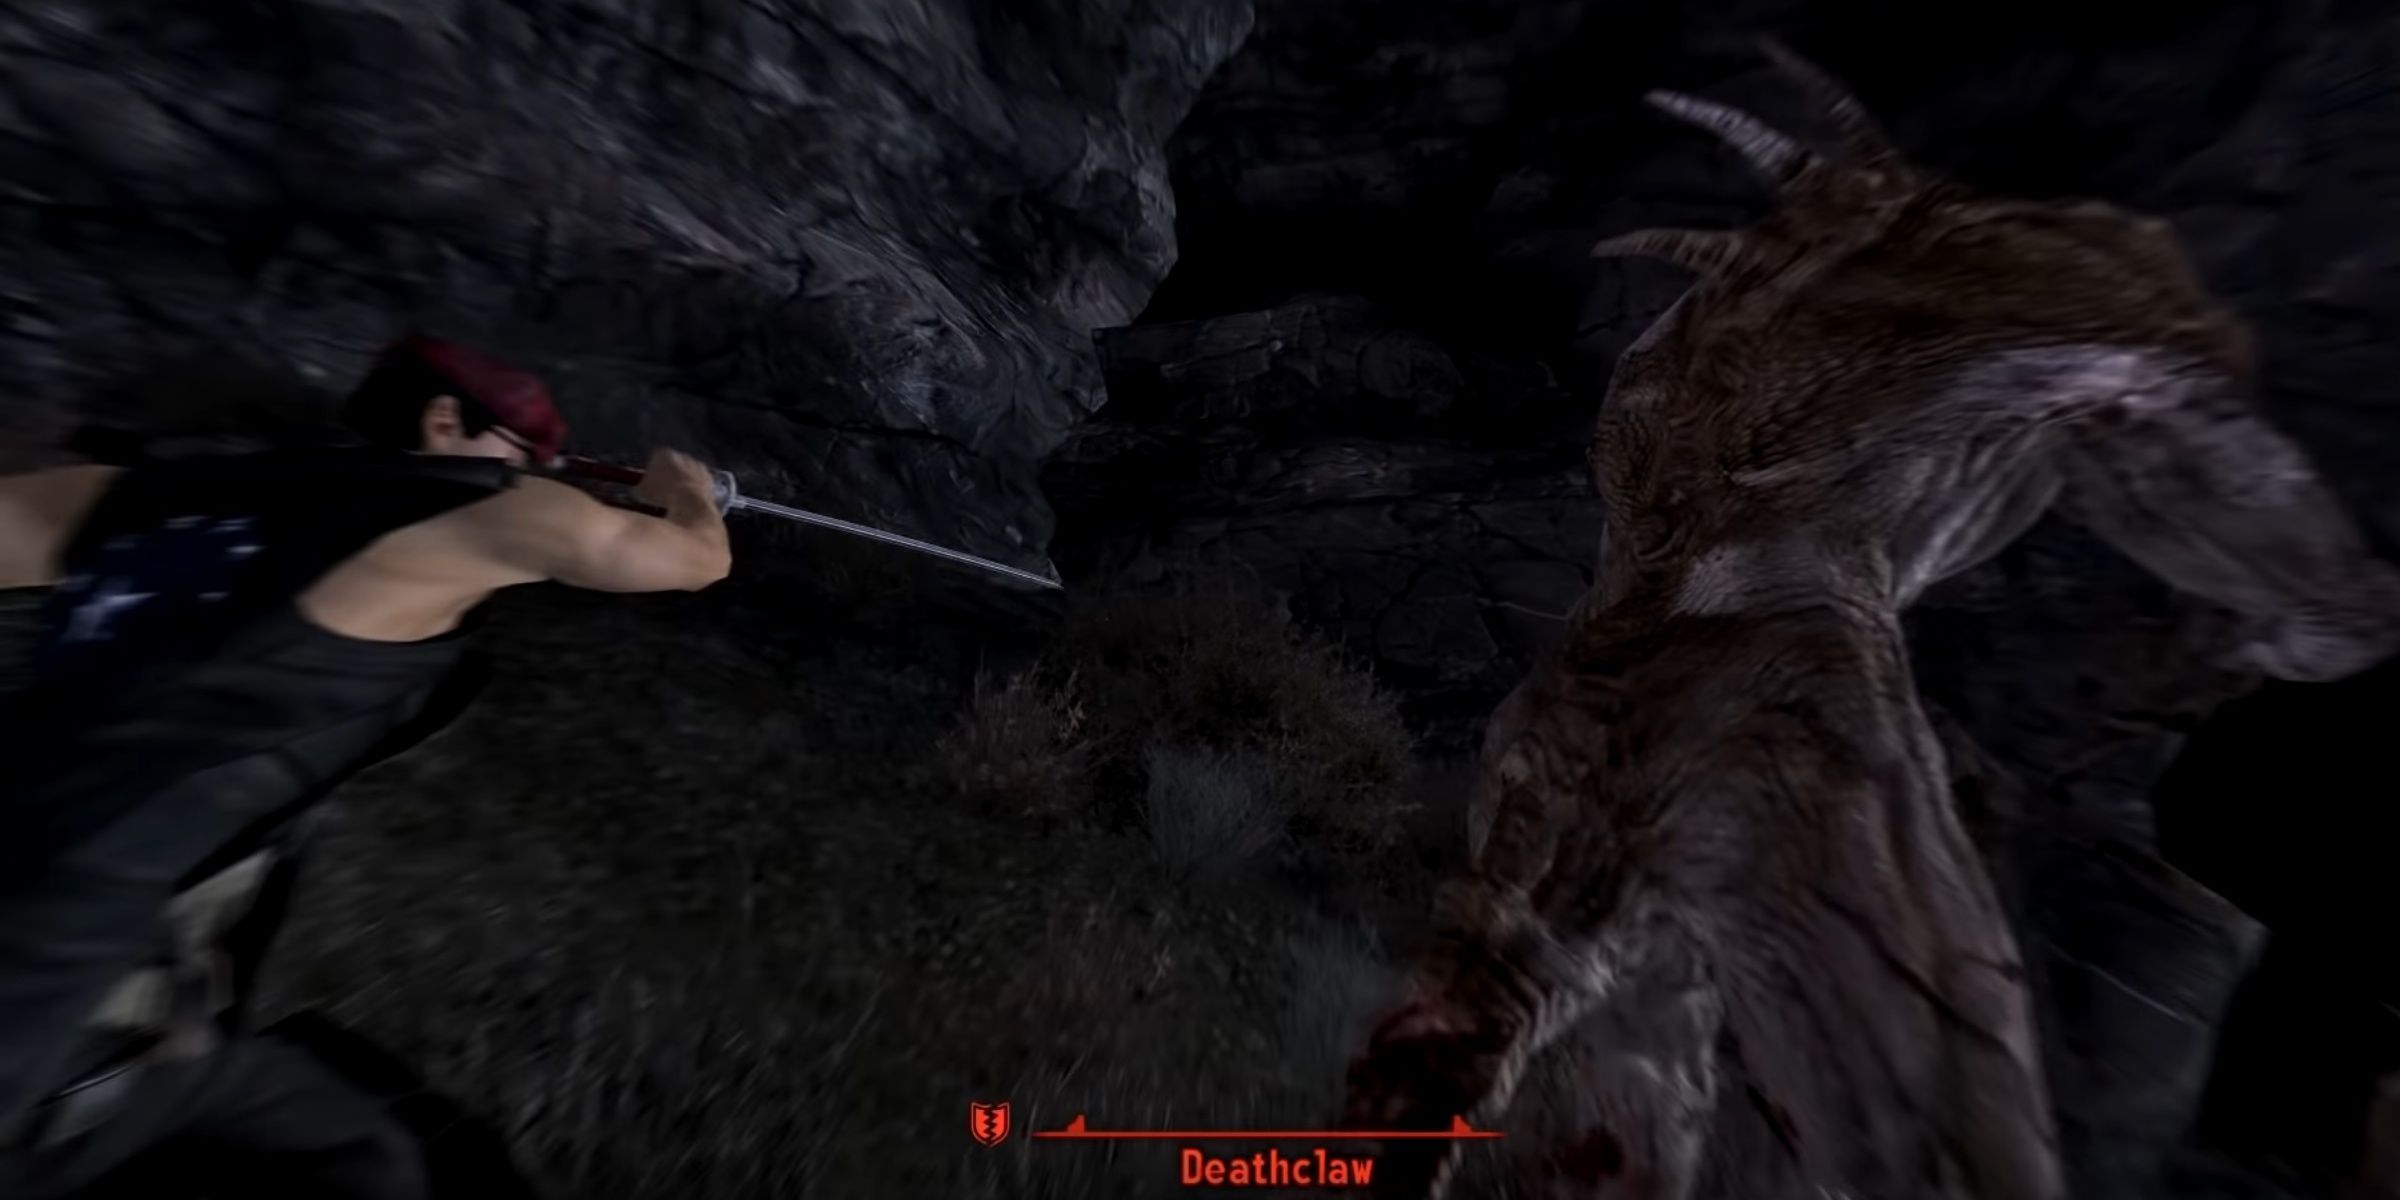 The main character peforming the Unlabored Flawlessness special attack on a Deathclaw. The move is done with a reverse grip sword swing